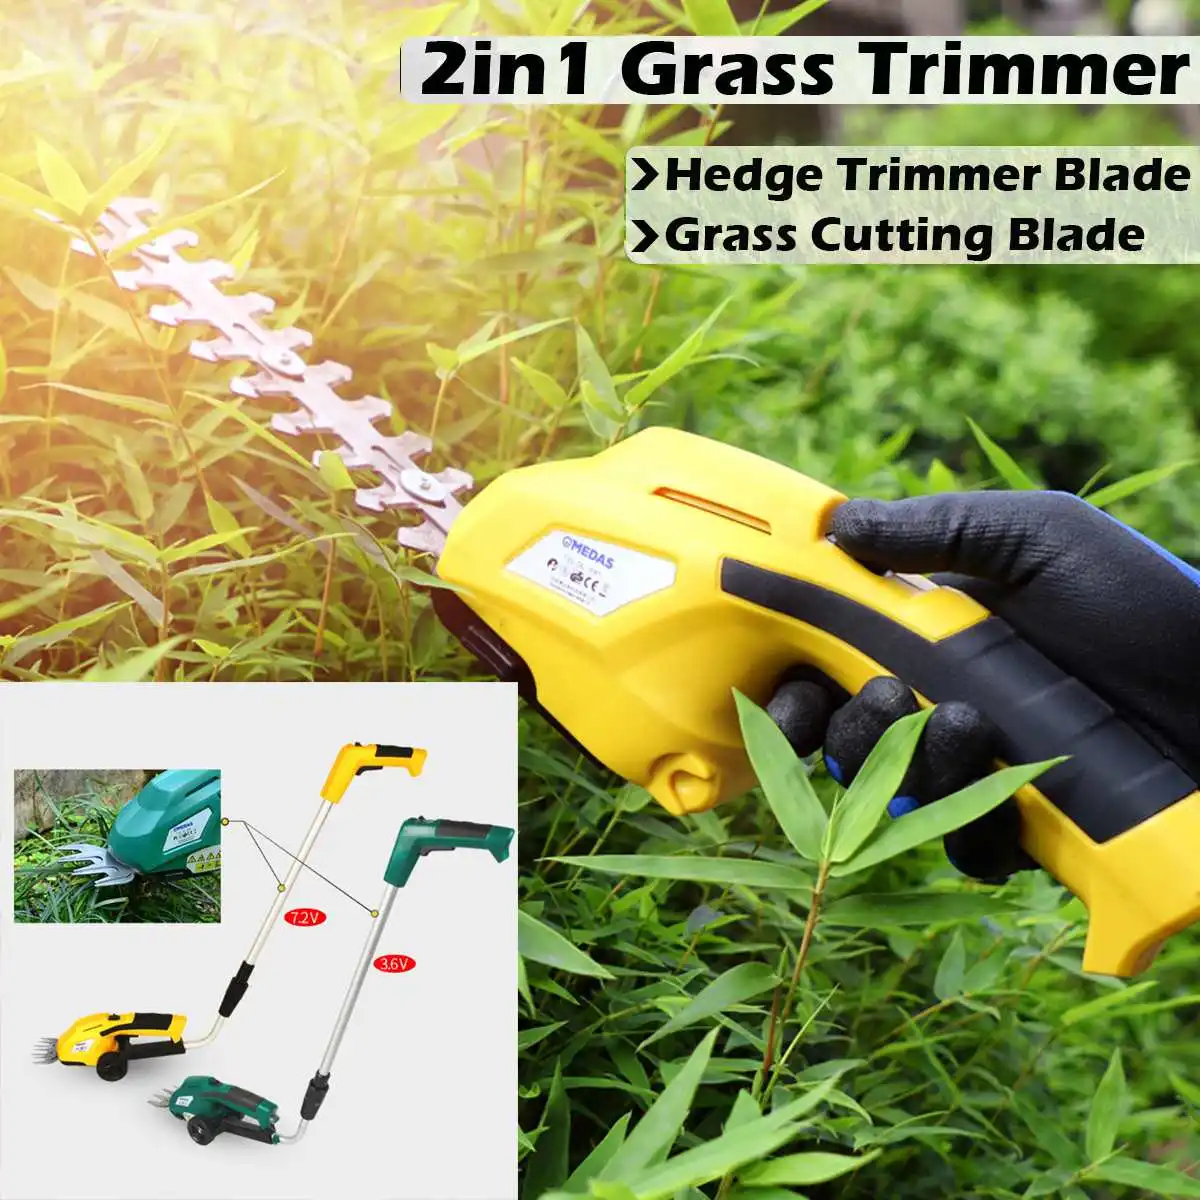 

Garden Tools 7.2V 3.6V Lithium Cordless Grass Trimmer Hedge Trimmer Pruning Shears Lawn Mower